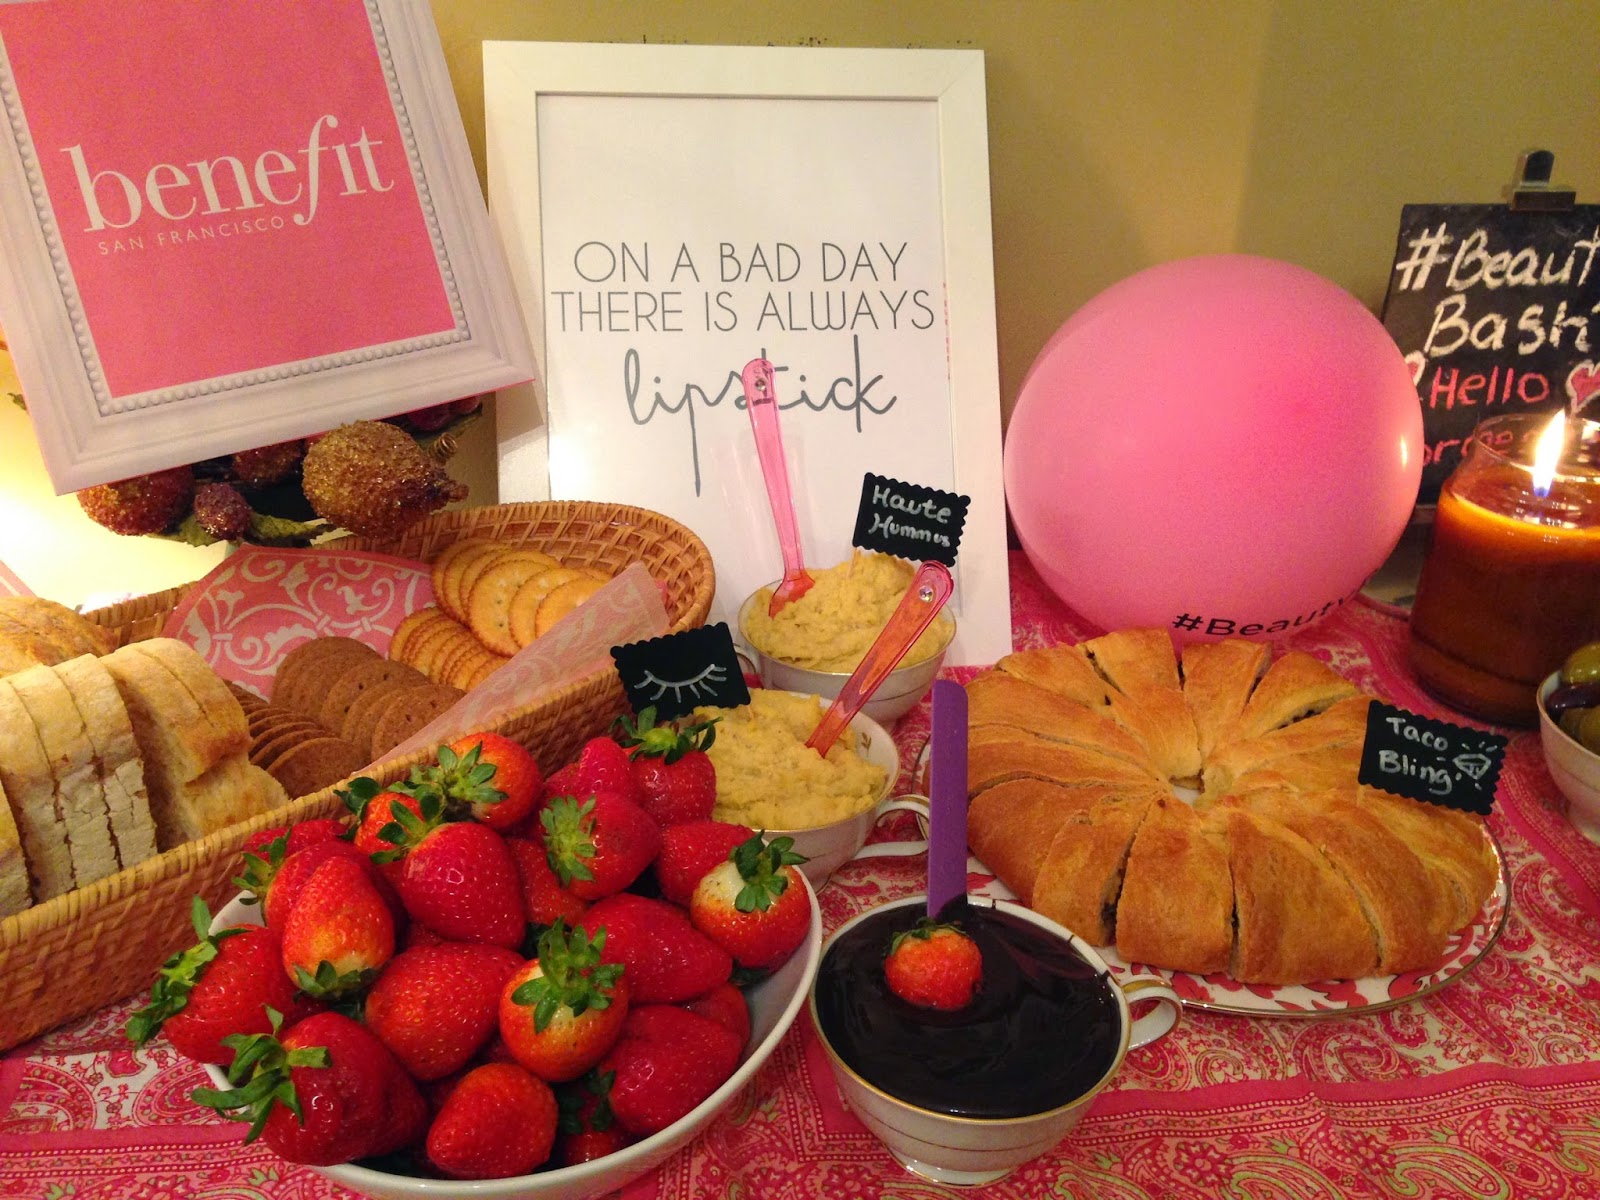 Fashion Maven Mommy: Beauty Bash with Benefit and Birchbox